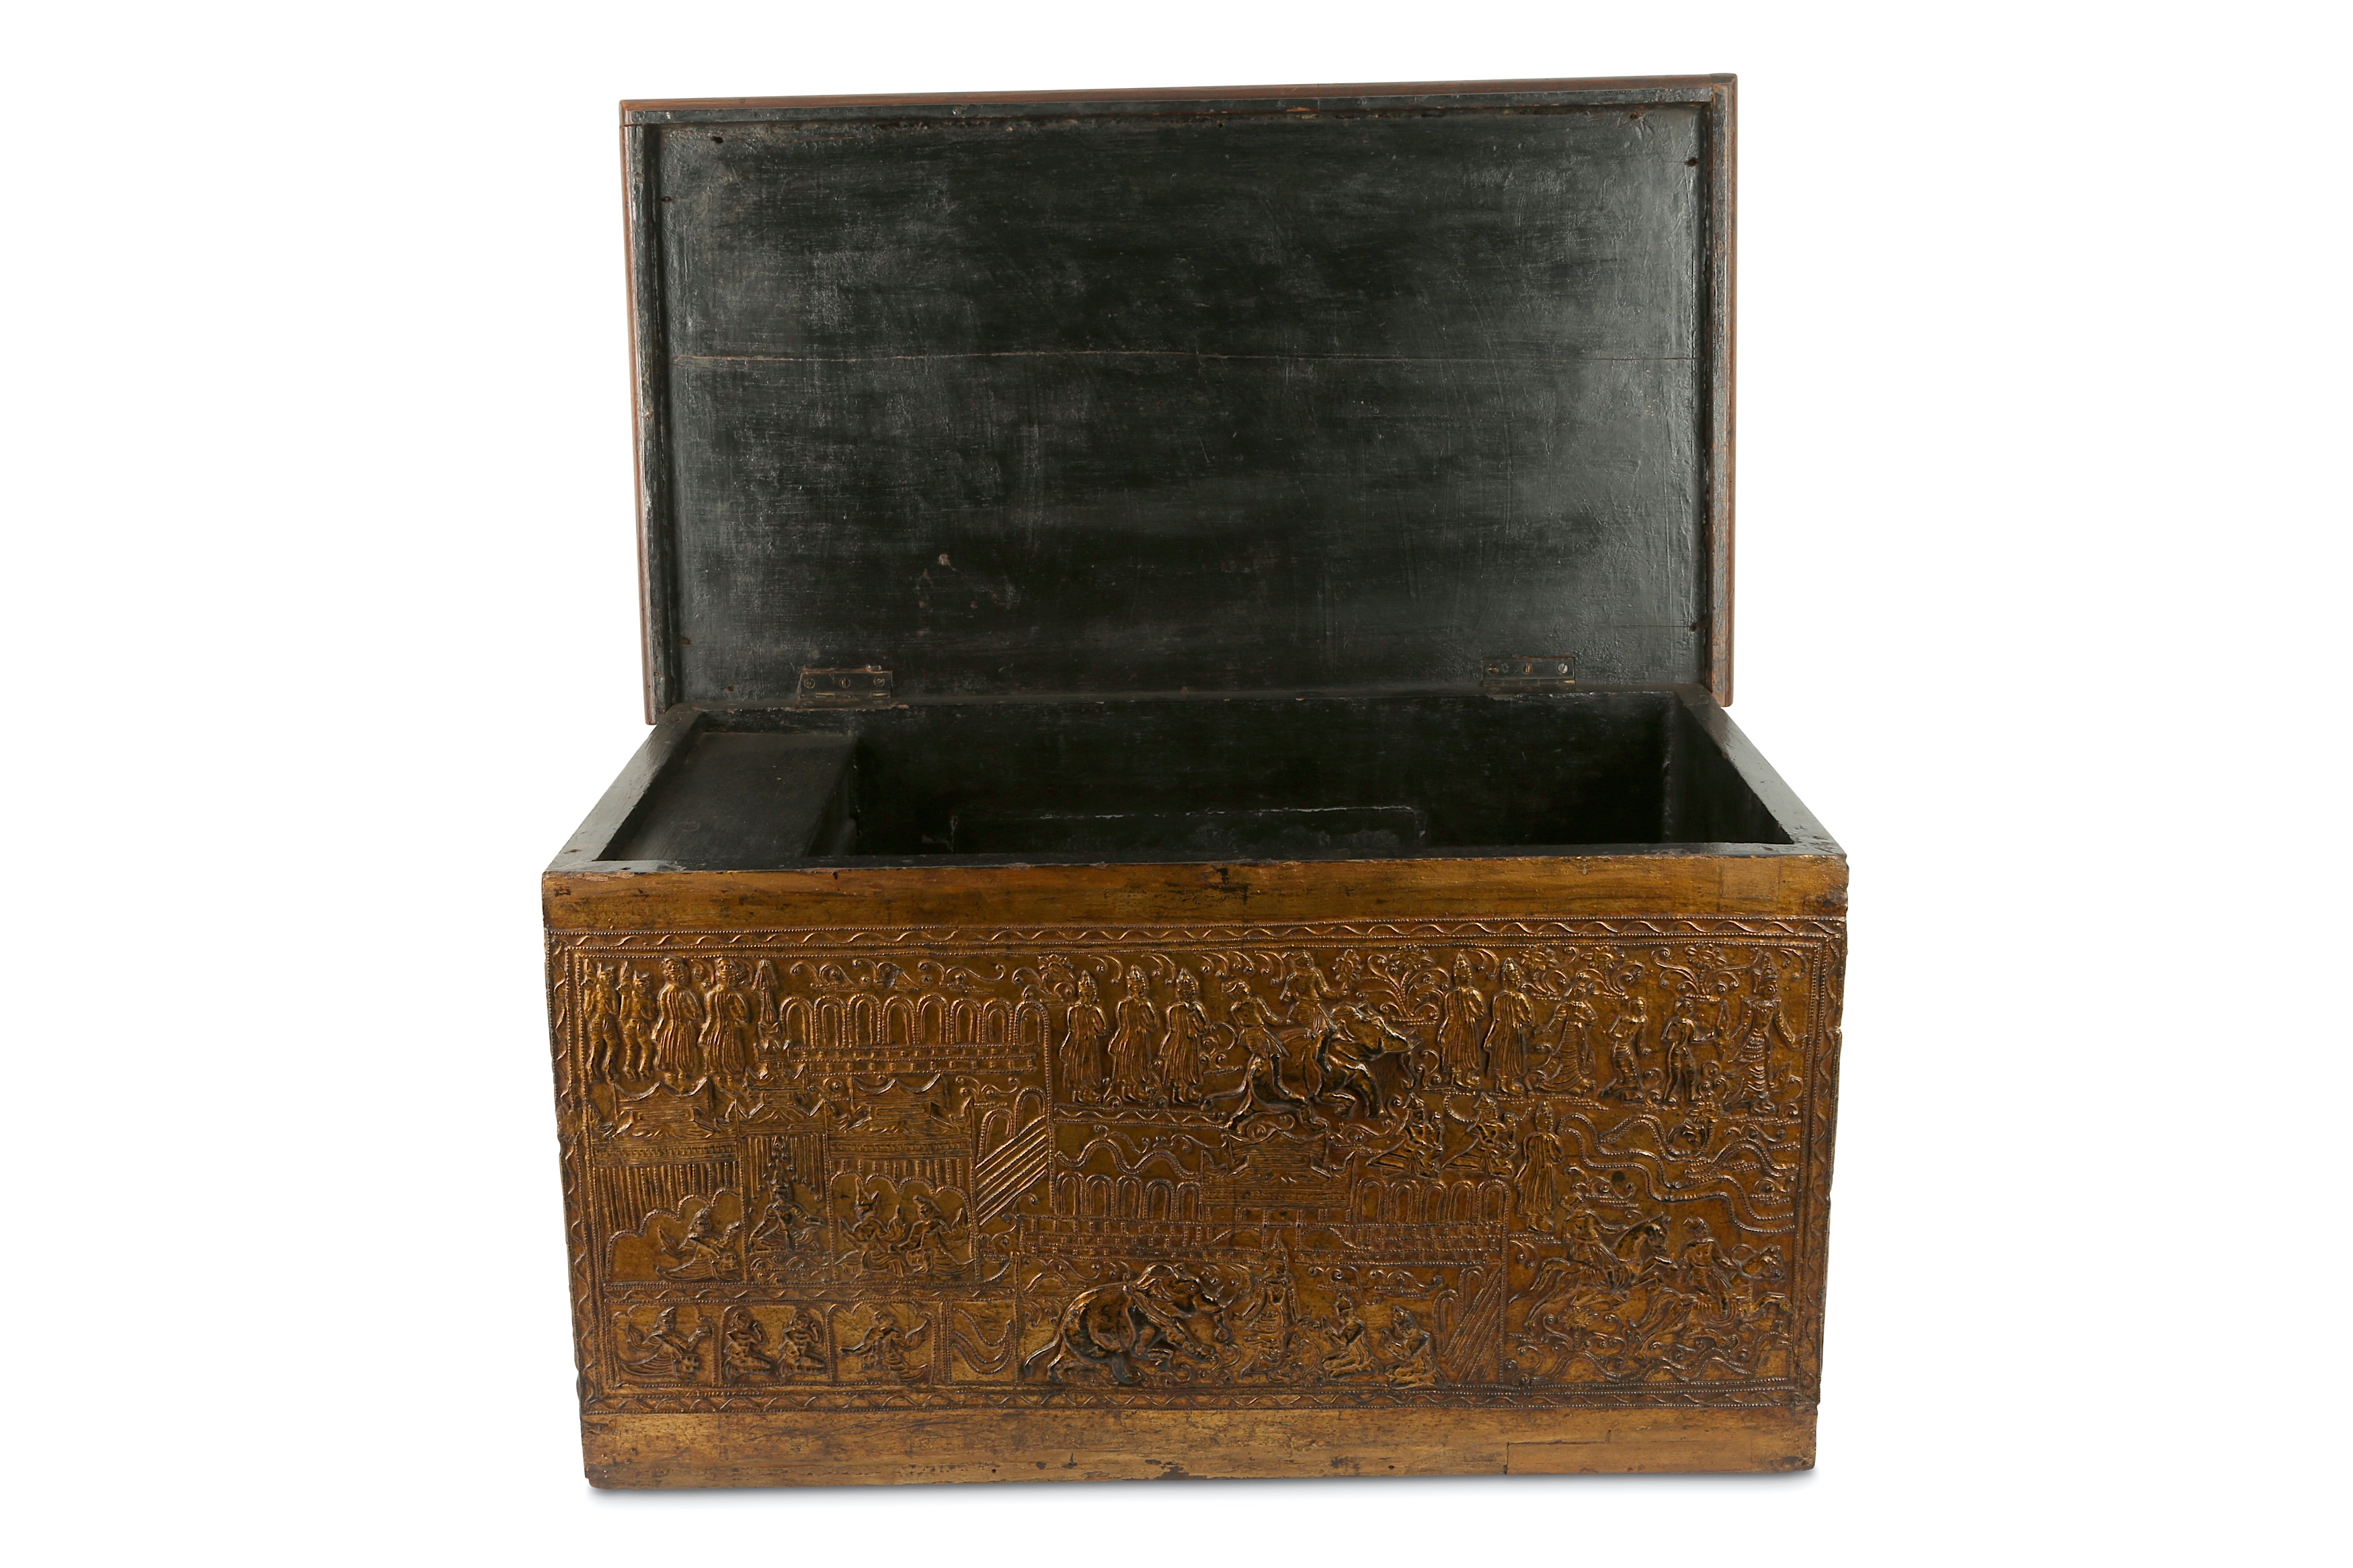 A GILDED LACQUER AND GESSO MANUSCRIPT STORAGE CABINET - Image 7 of 7